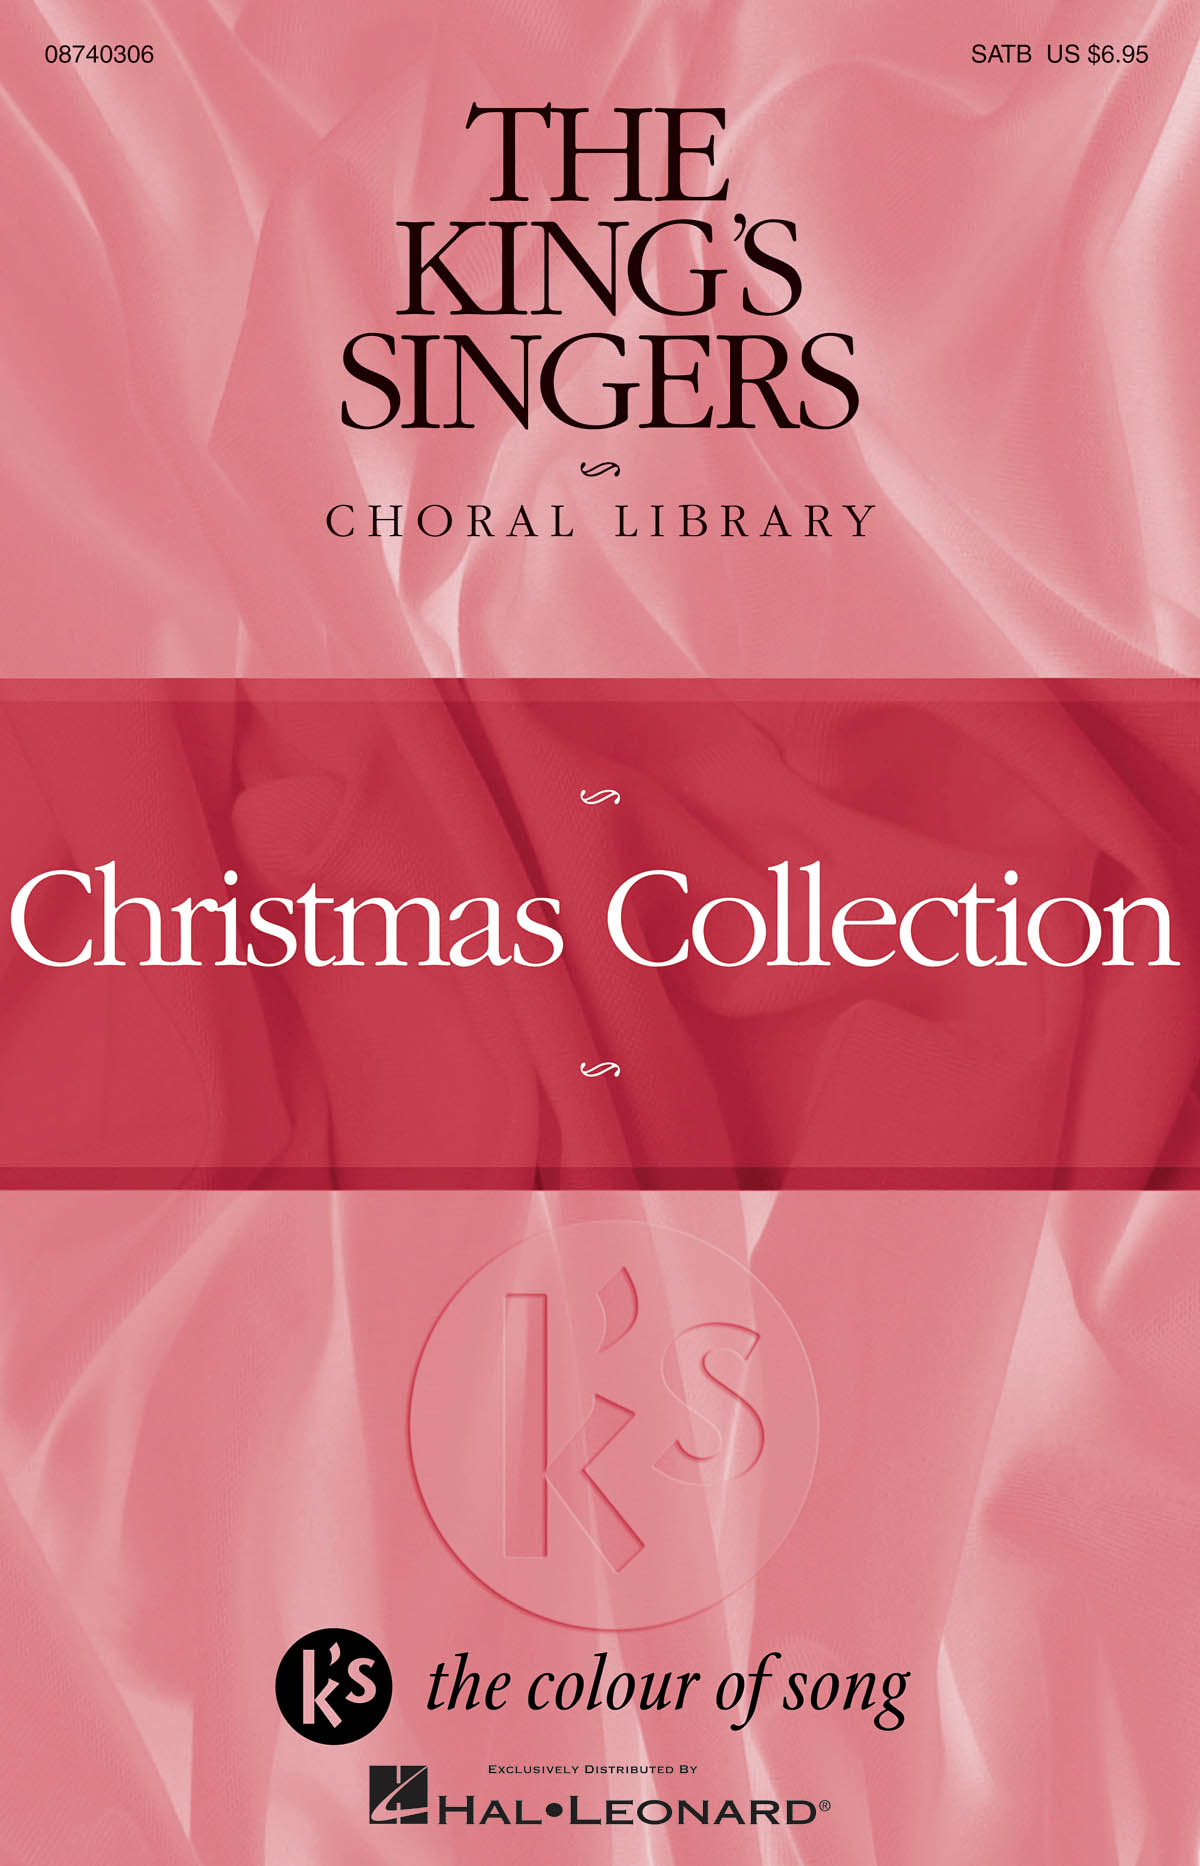 The King's Singers: The King's Singers Choral Library Christmas Col.: SATB: